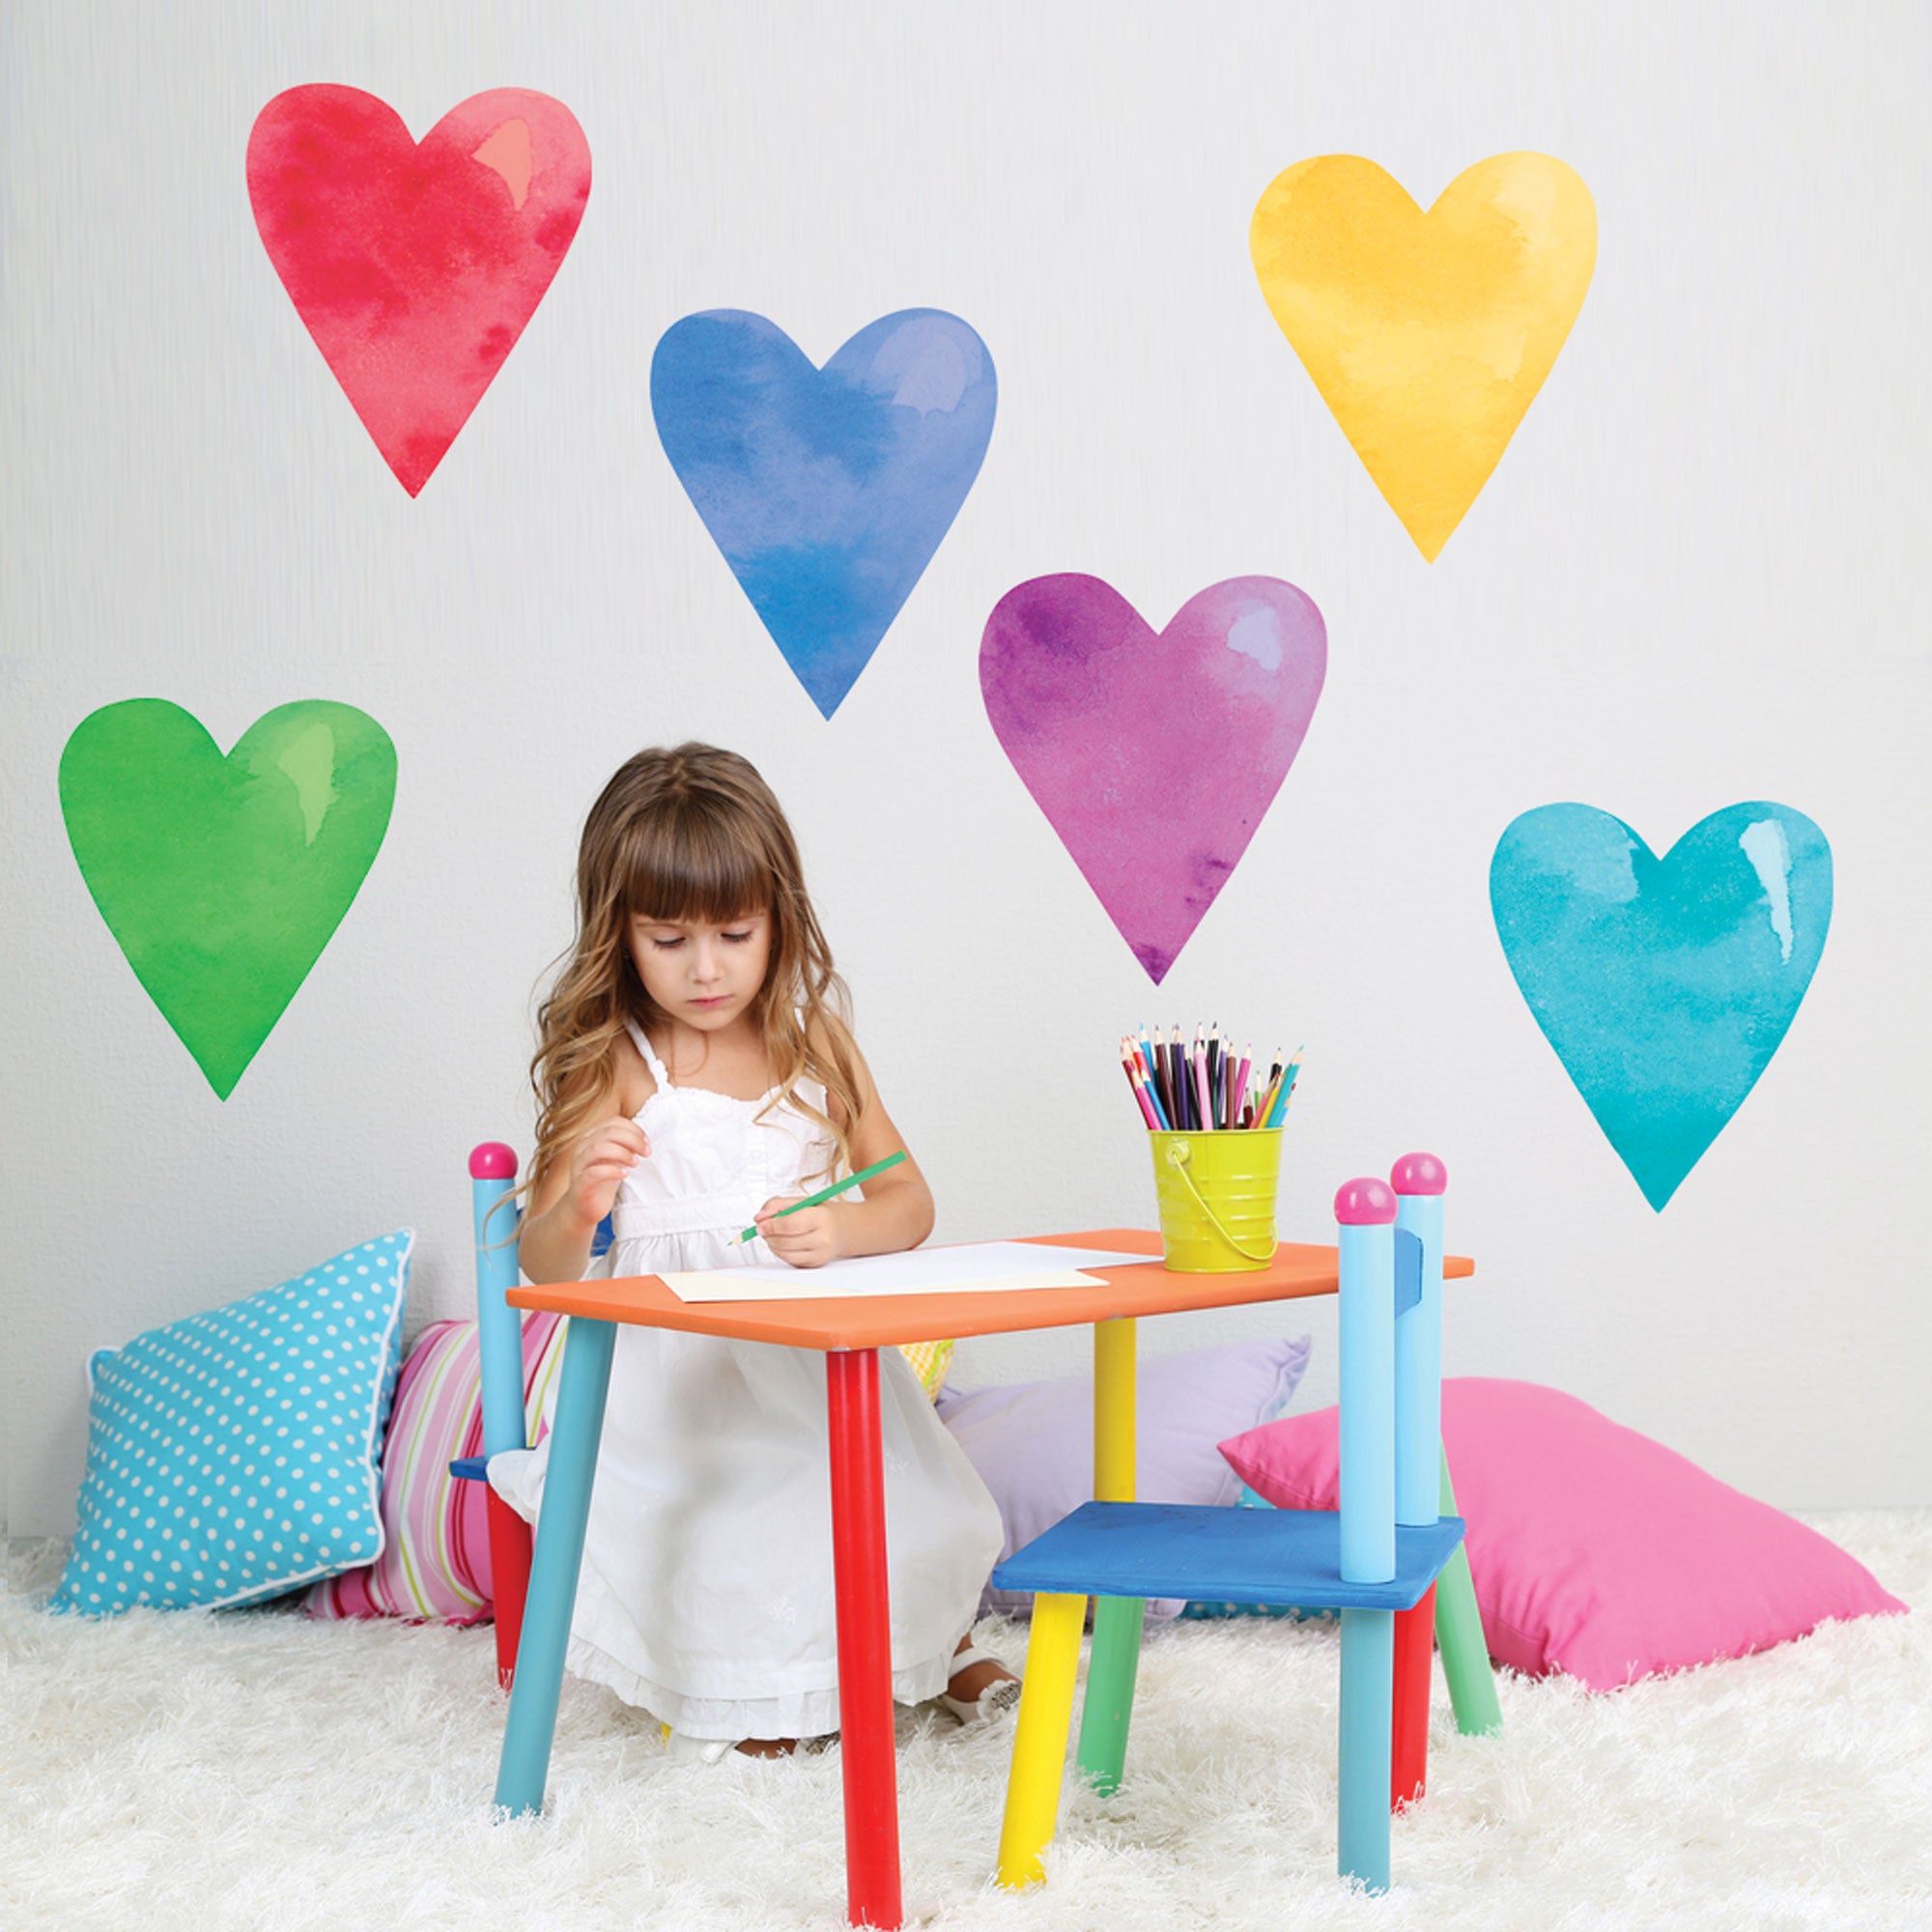 Pink Large Watercolor Rainbow Peel and Stick Vinyl Wall Sticker